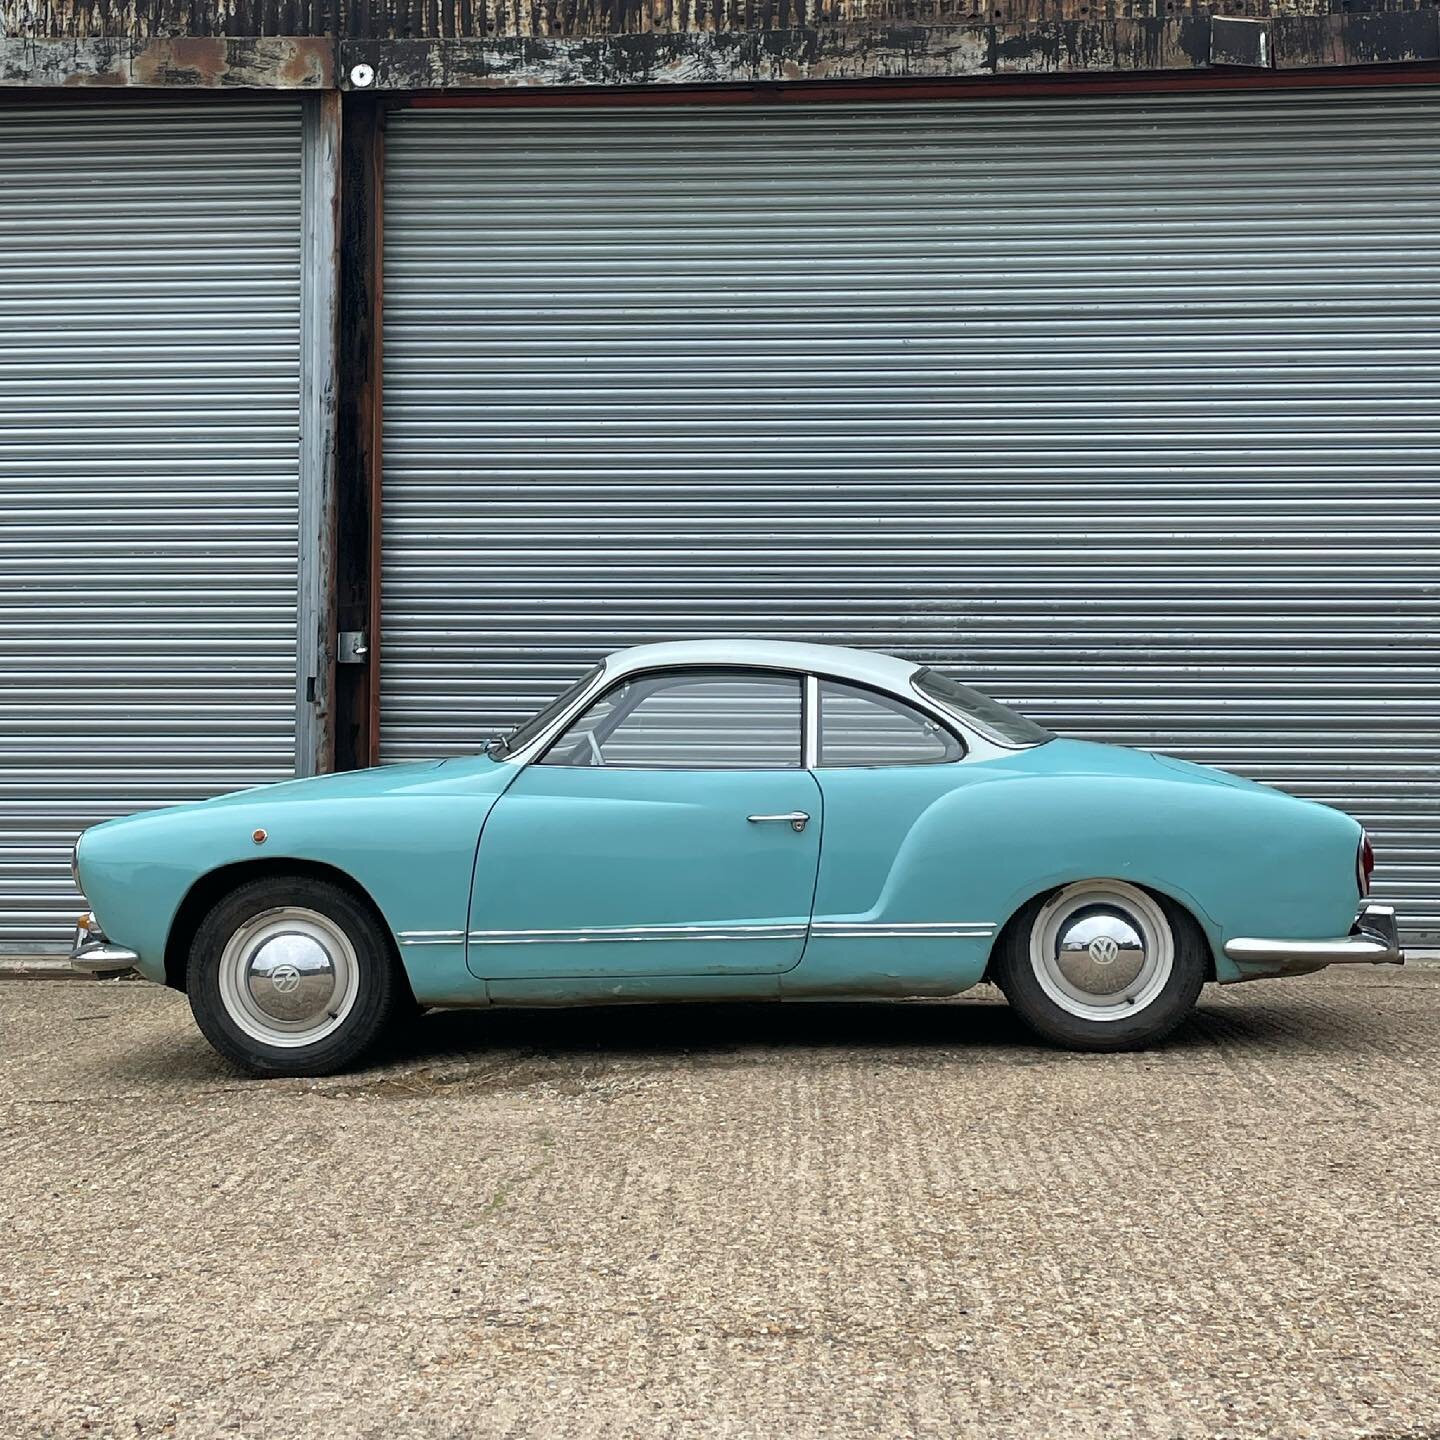 into storage at HVS today. Now under a soft cover and battery on charge. #hvsuk #carstorageuk #karmannghia #aircooledvw #hitchin #htownclassicanddubclub